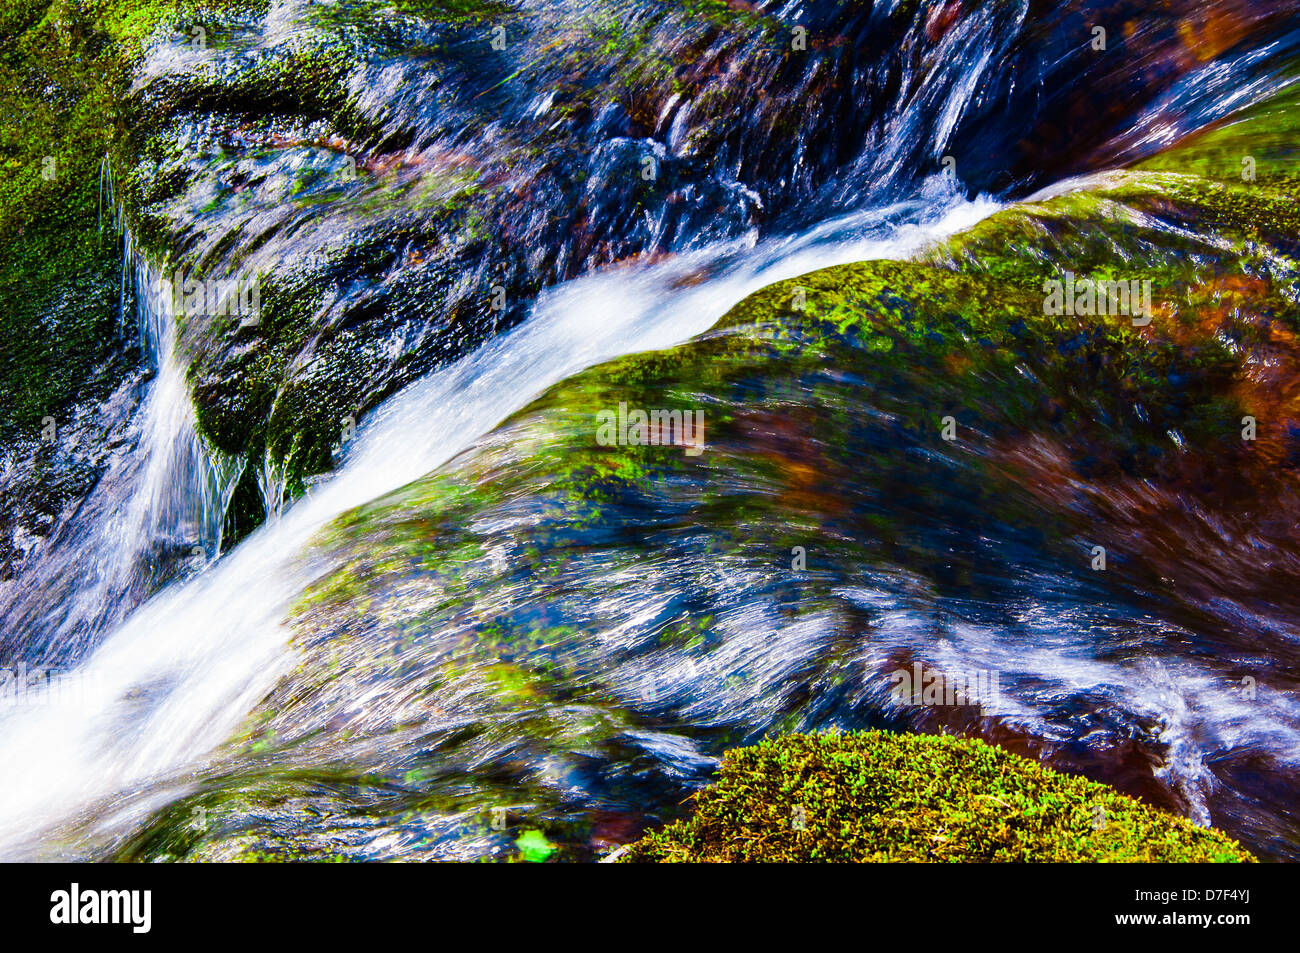 Crystal clear water of a forest stream, flowing over green mossy rocks. Stock Photo